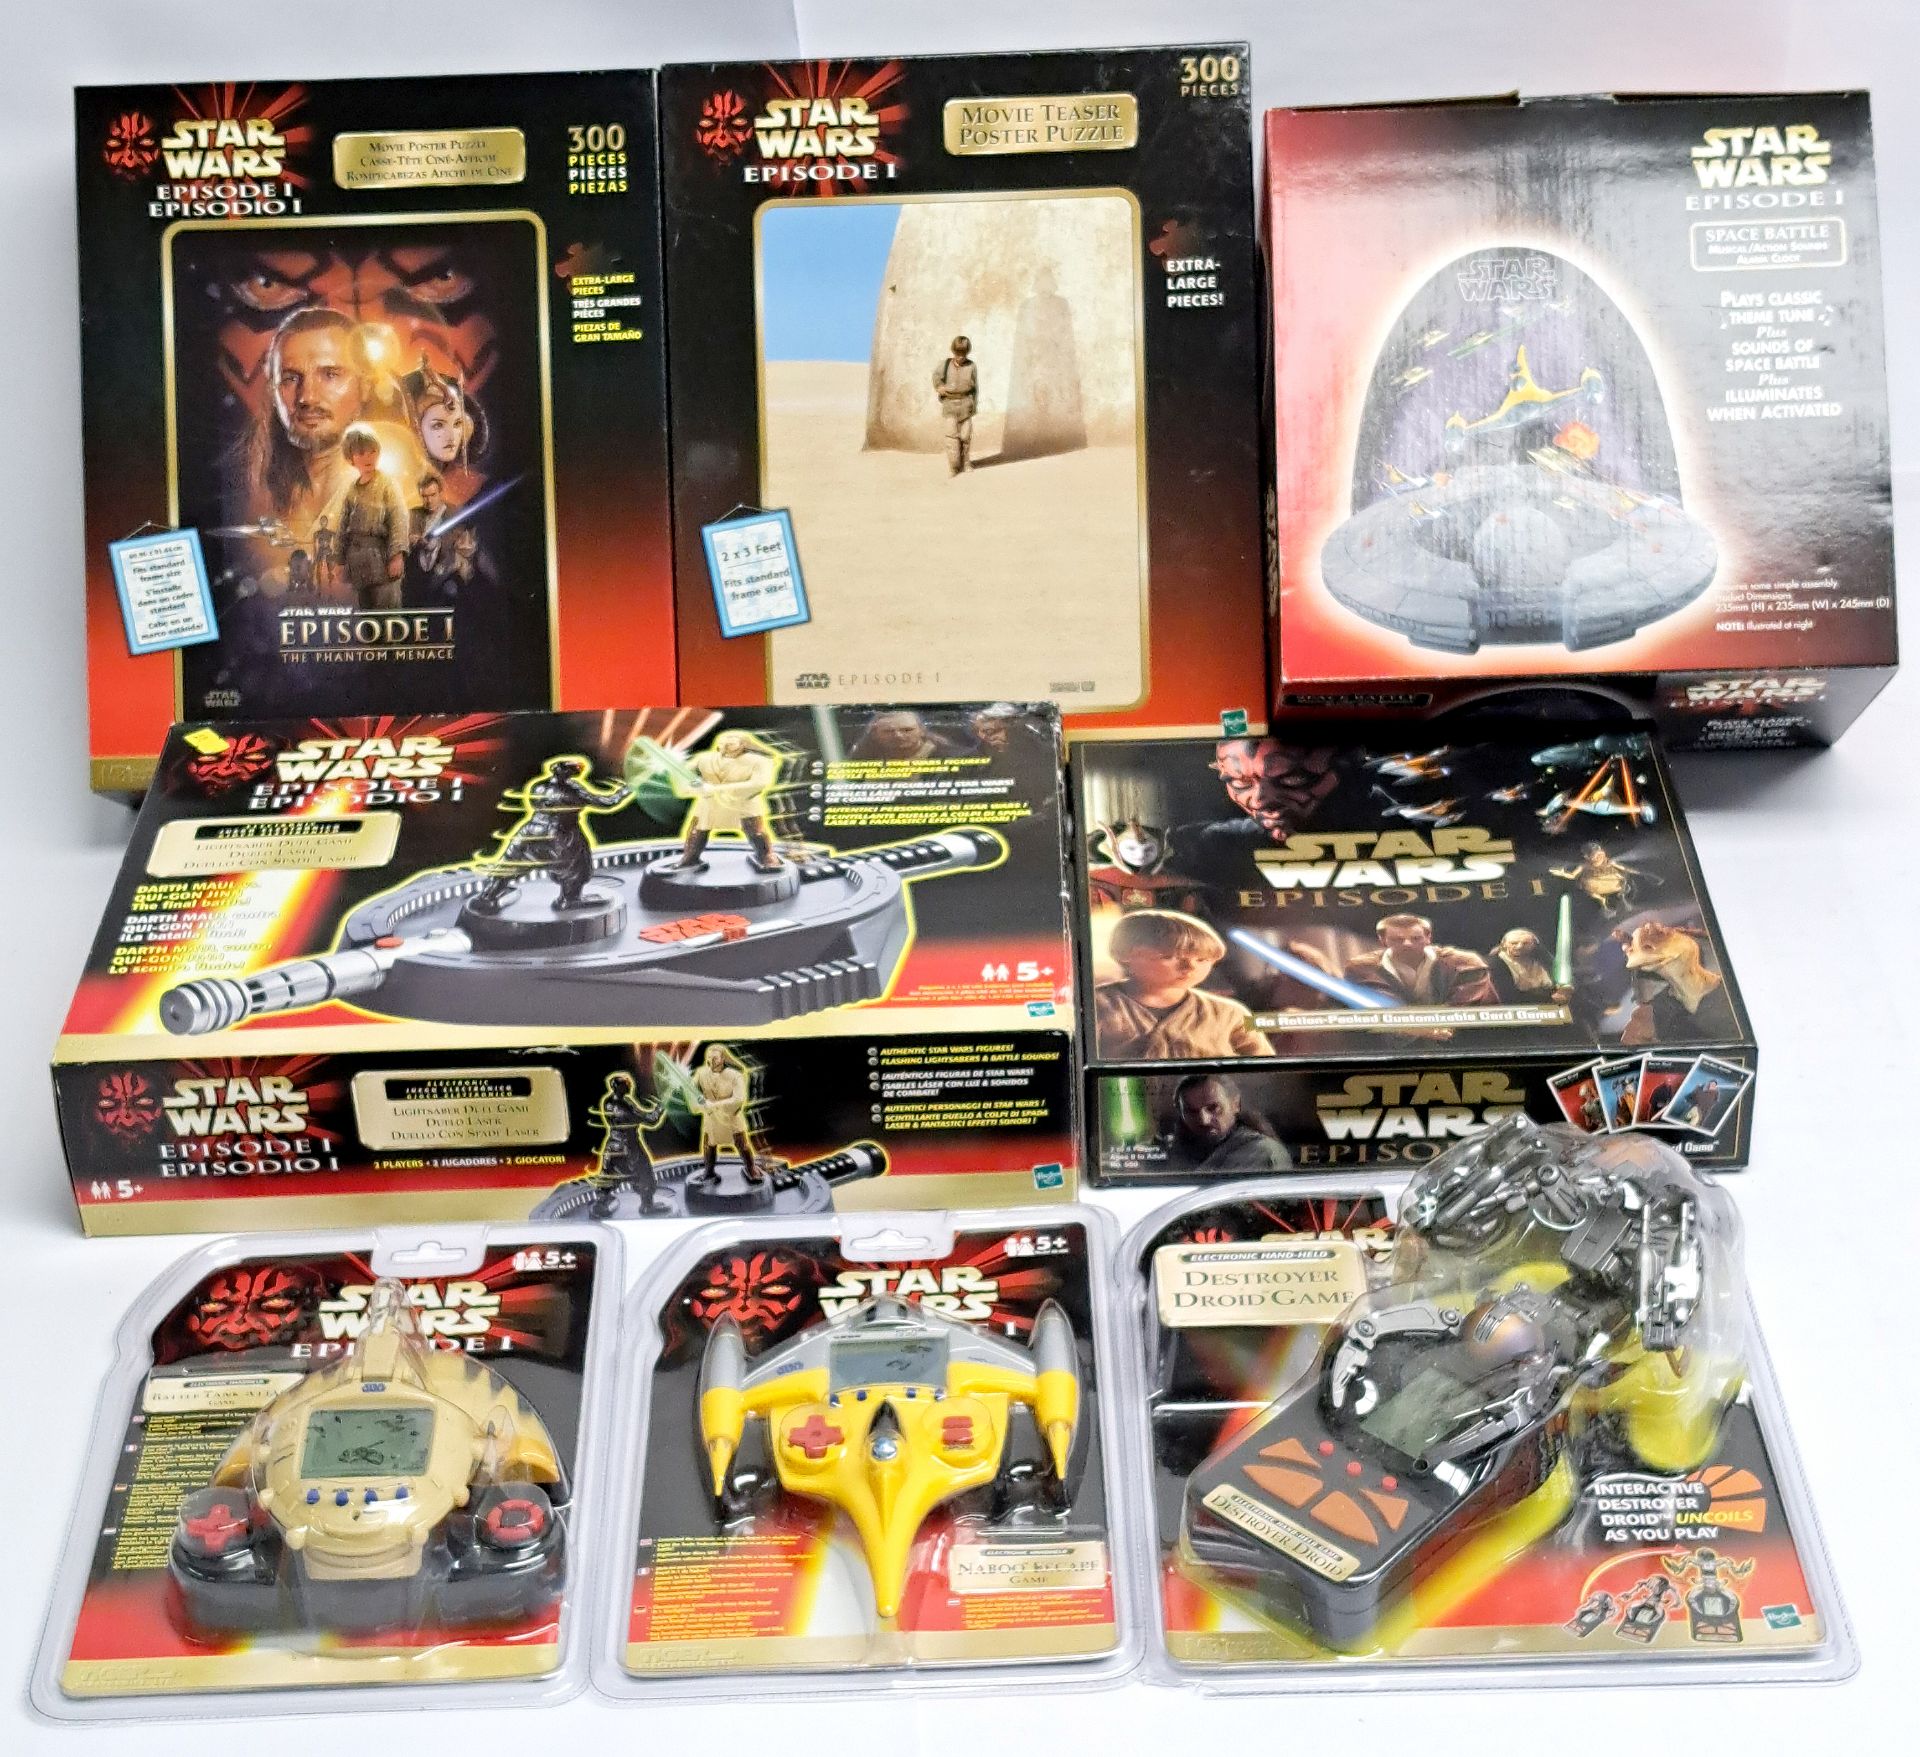 Hasbro, Tiger Star Wars electronic games, jigsaws and similar assorted collectibles